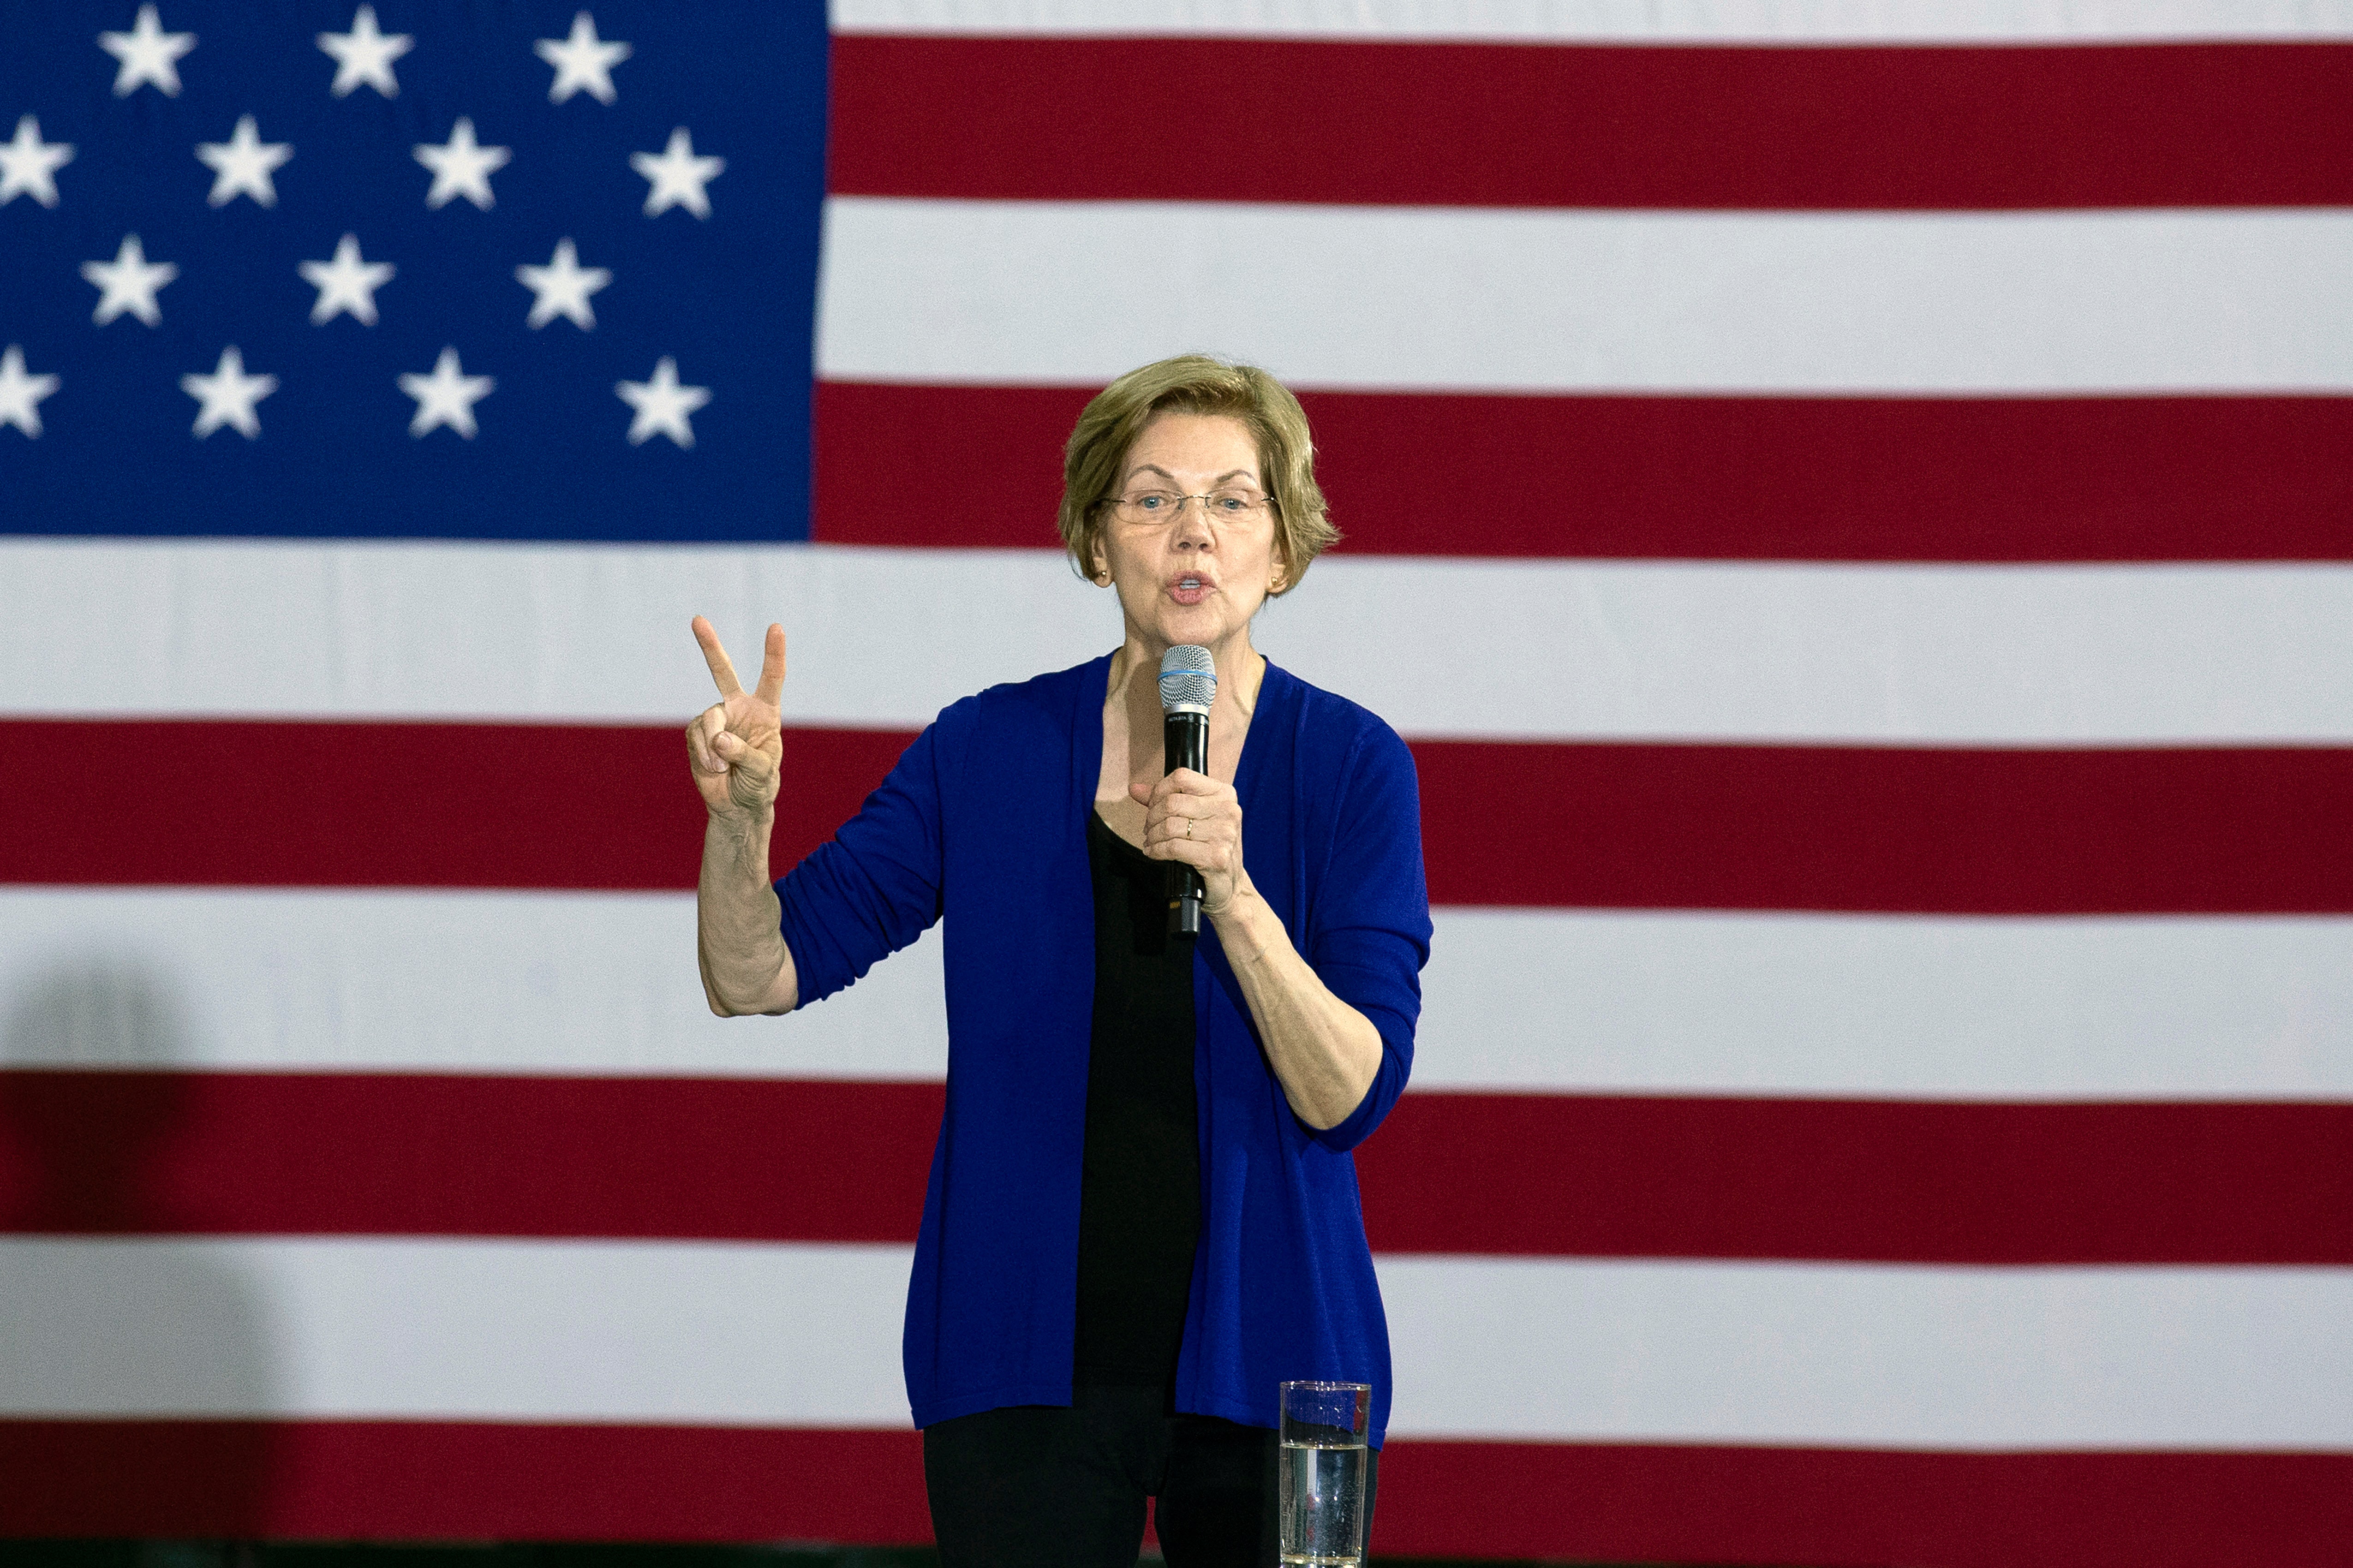 Elizabeth Warren calls for Congress to expand Supreme Court: 'I believe it’s time'